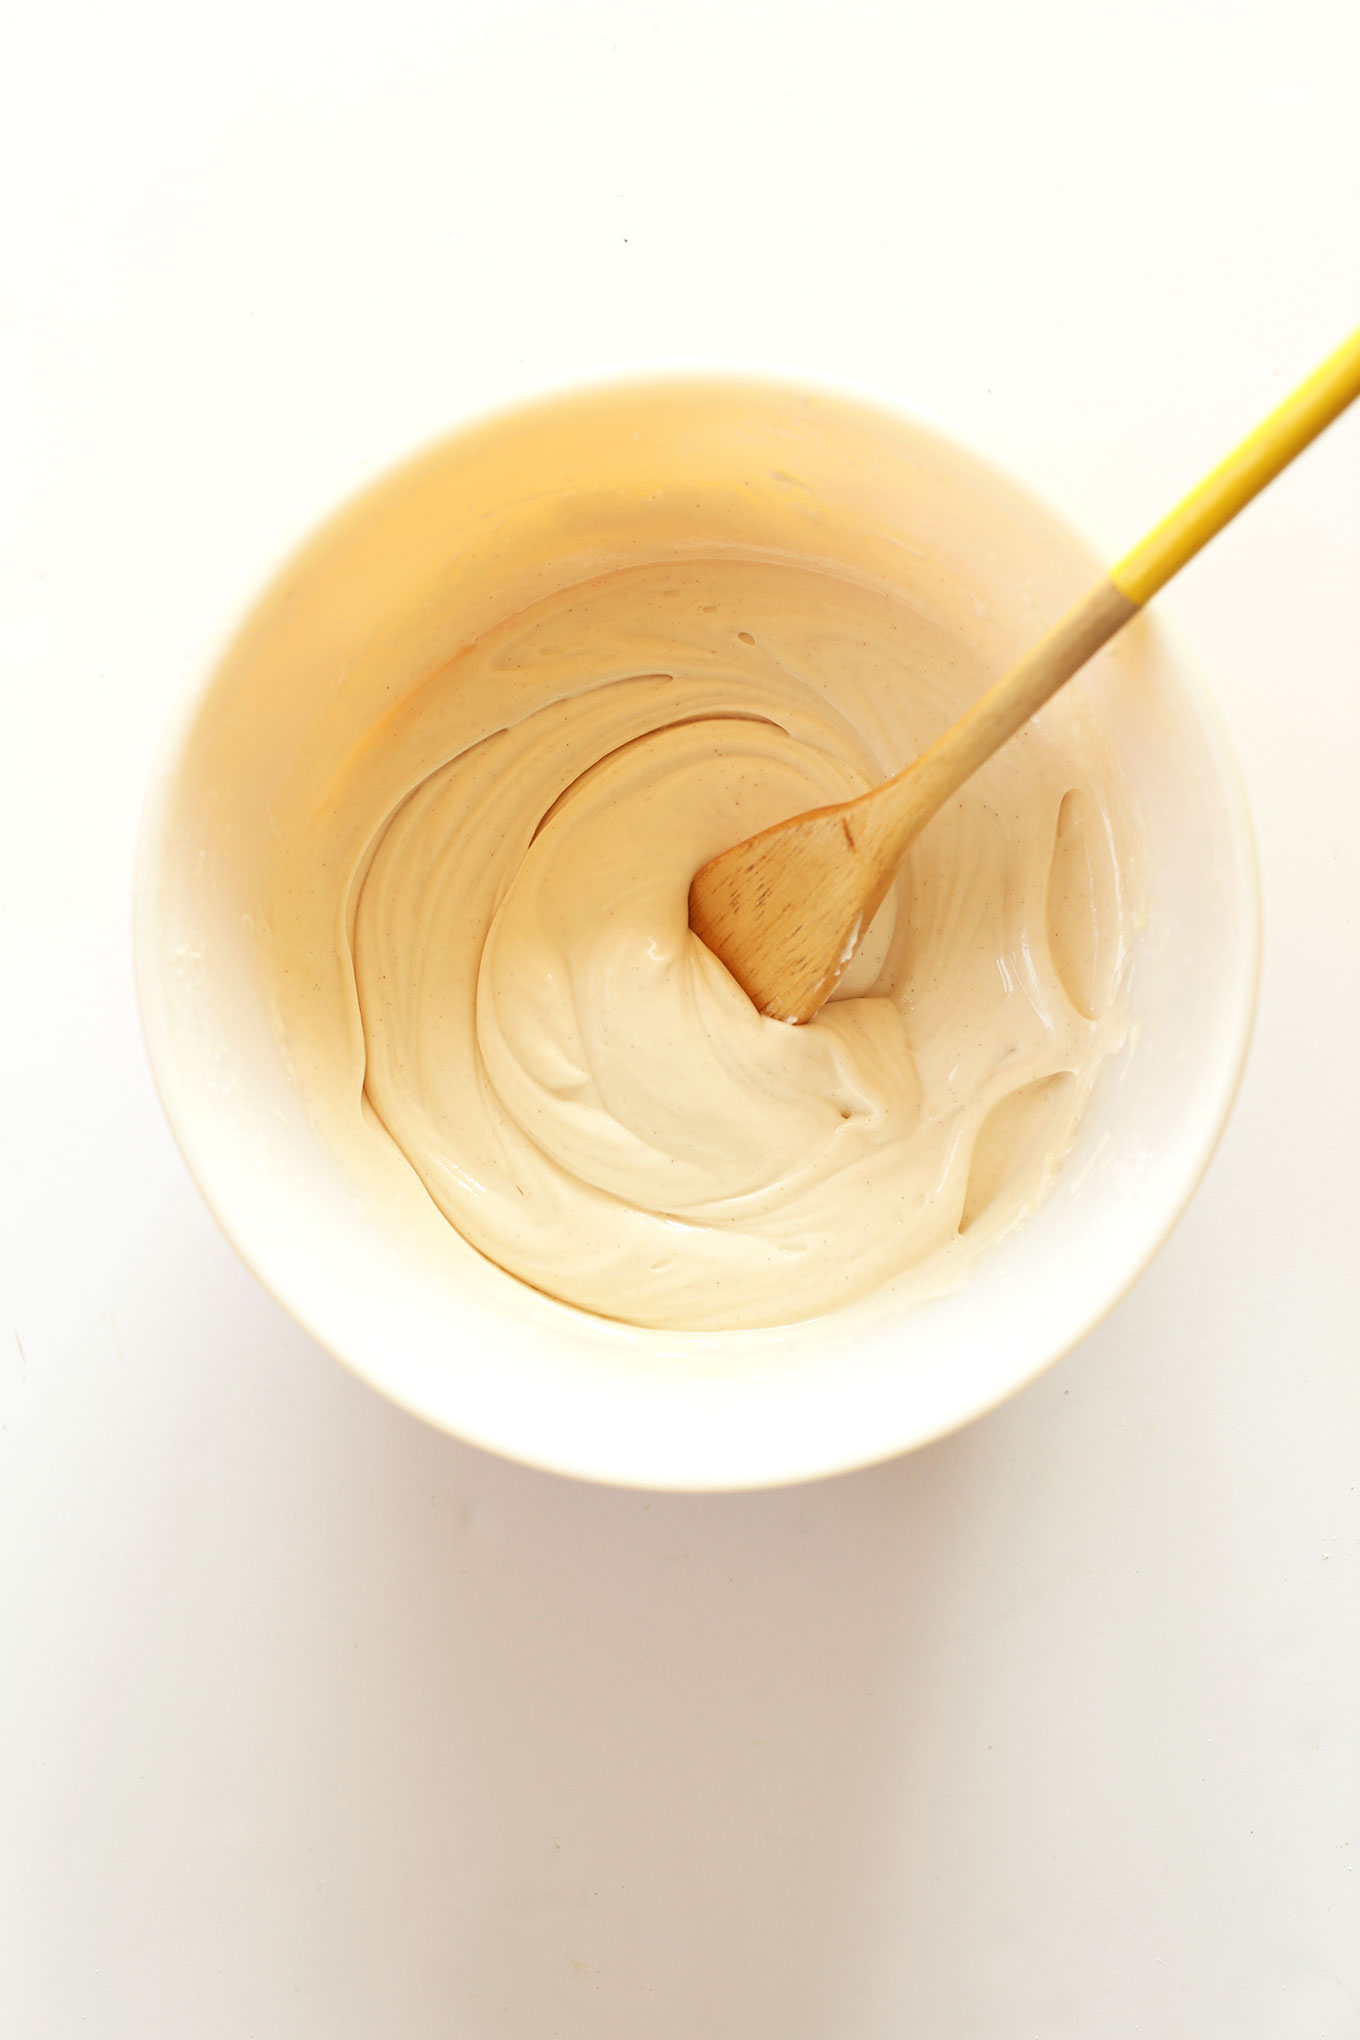 Using a wooden spoon to stir a bowl of our easy Vegan Cream Cheese Frosting